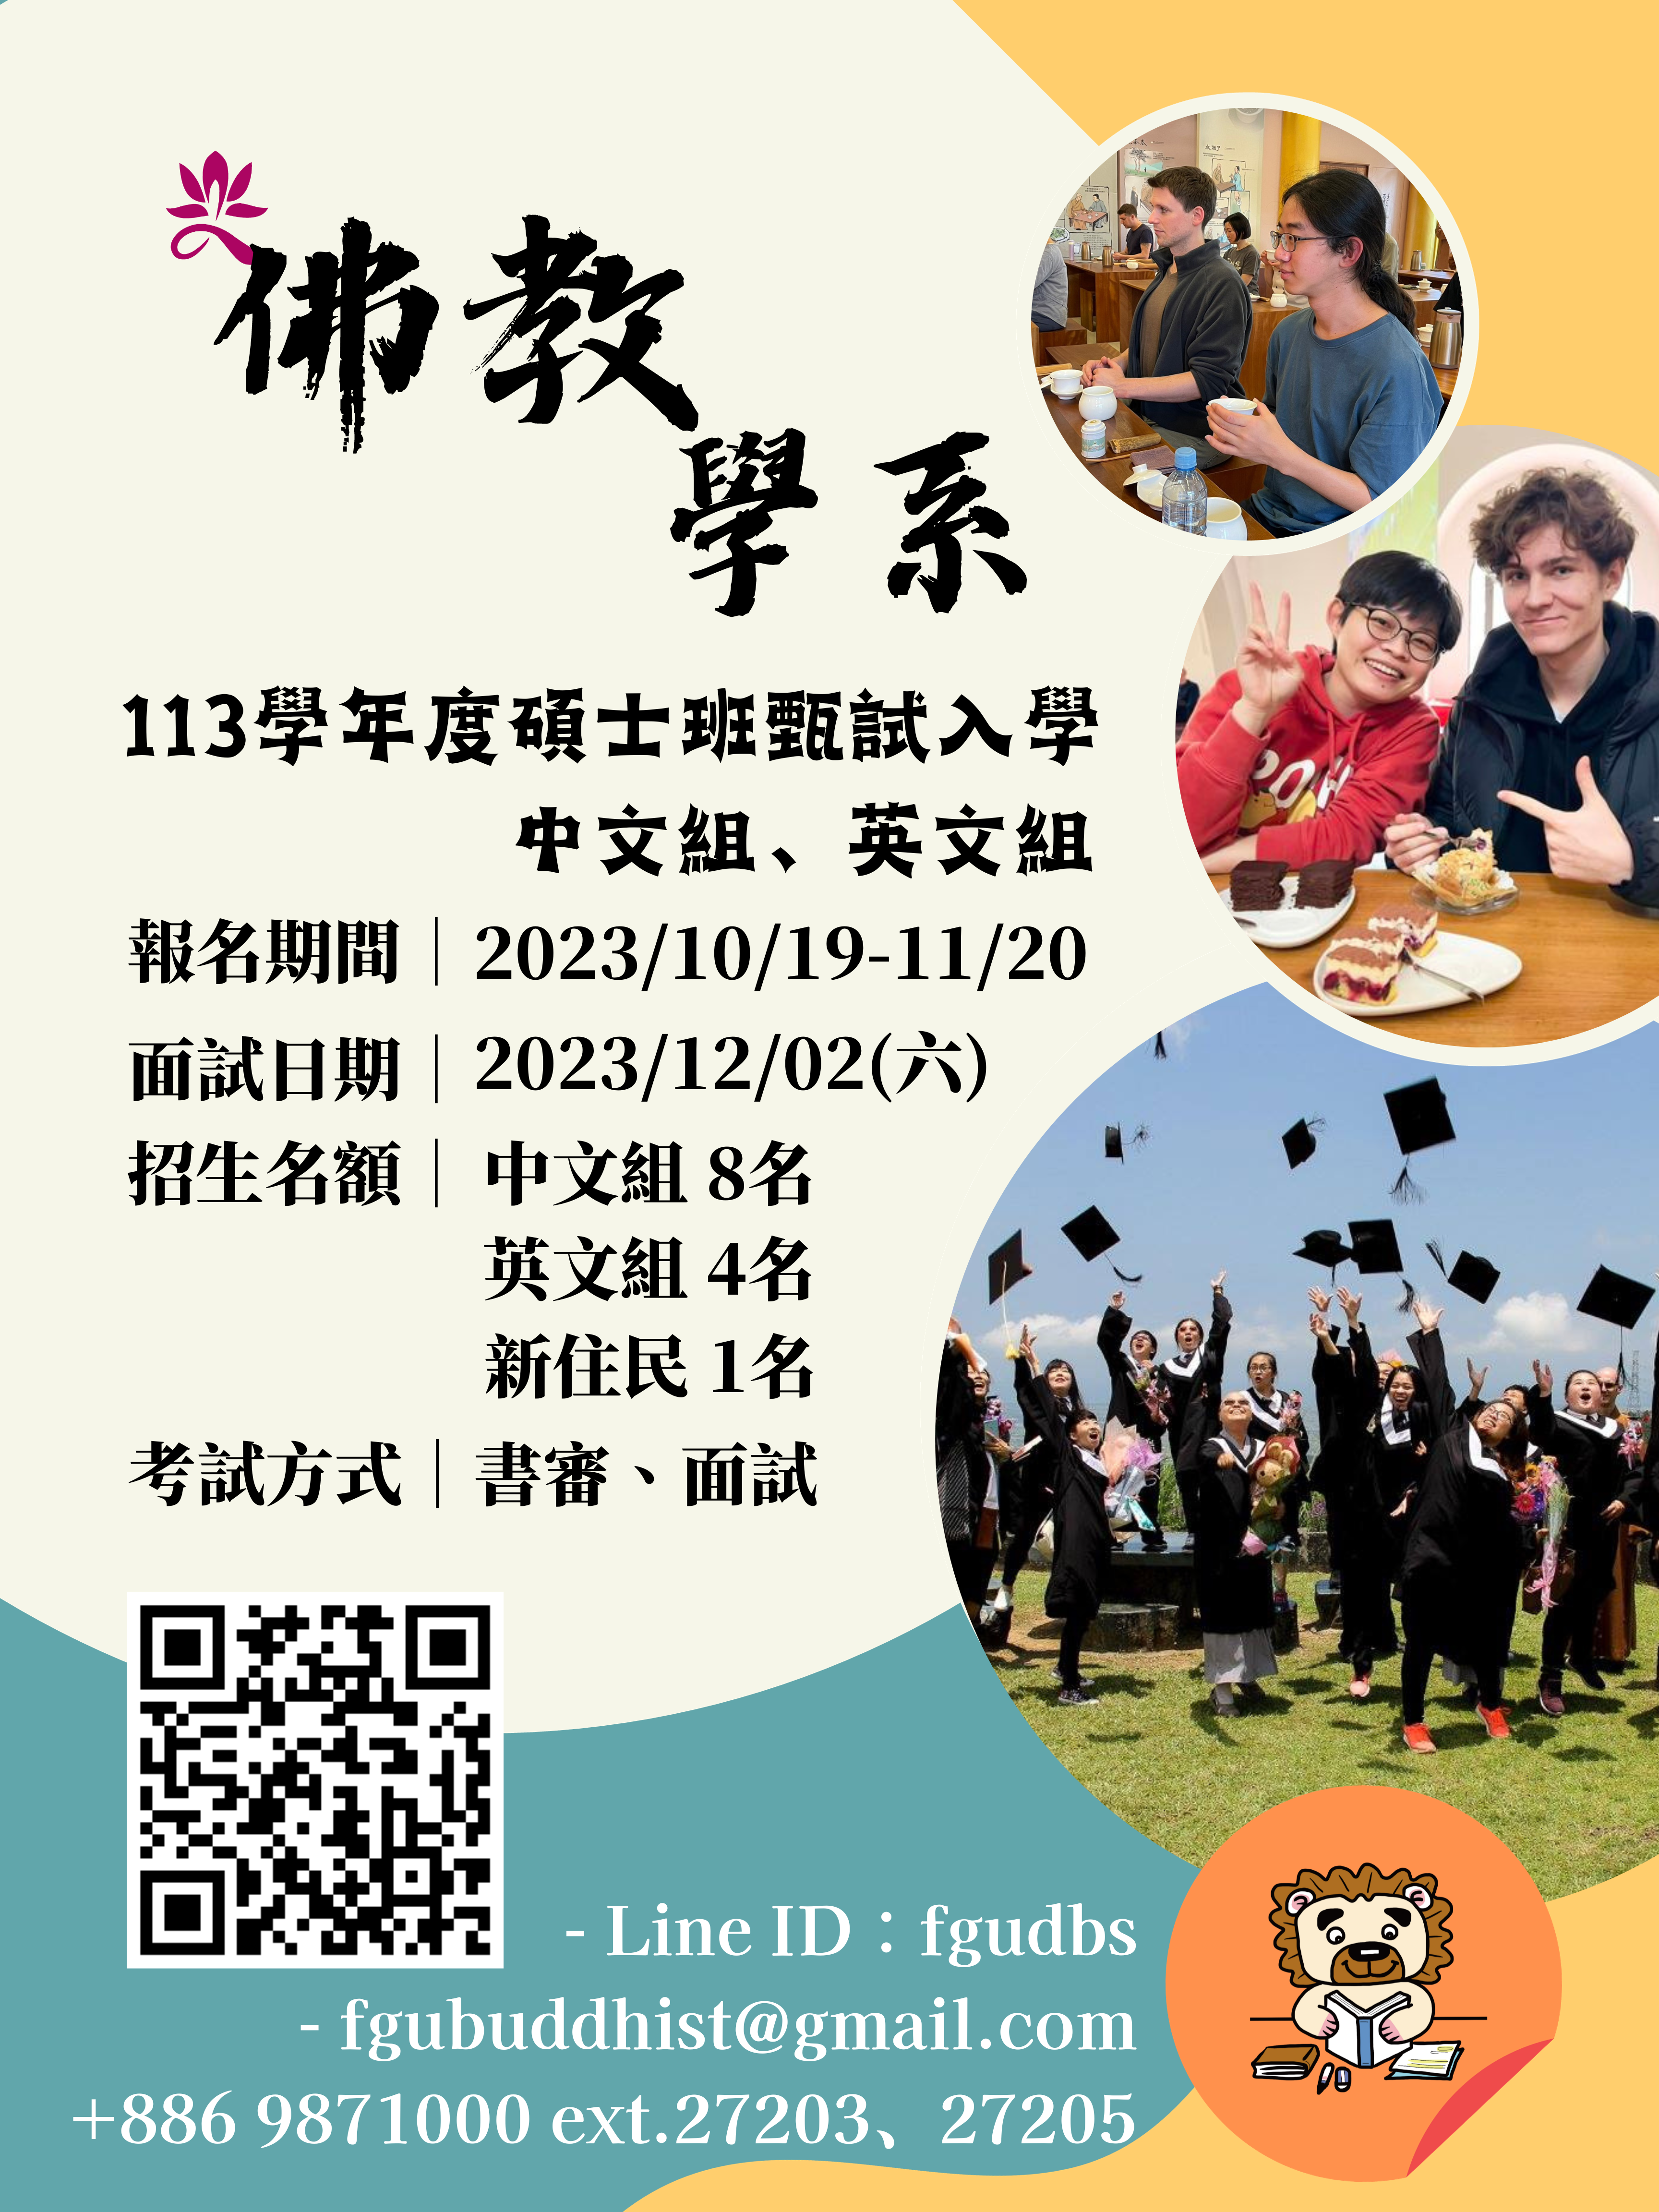 Department of Buddhist Studies Fo Guang University (1)